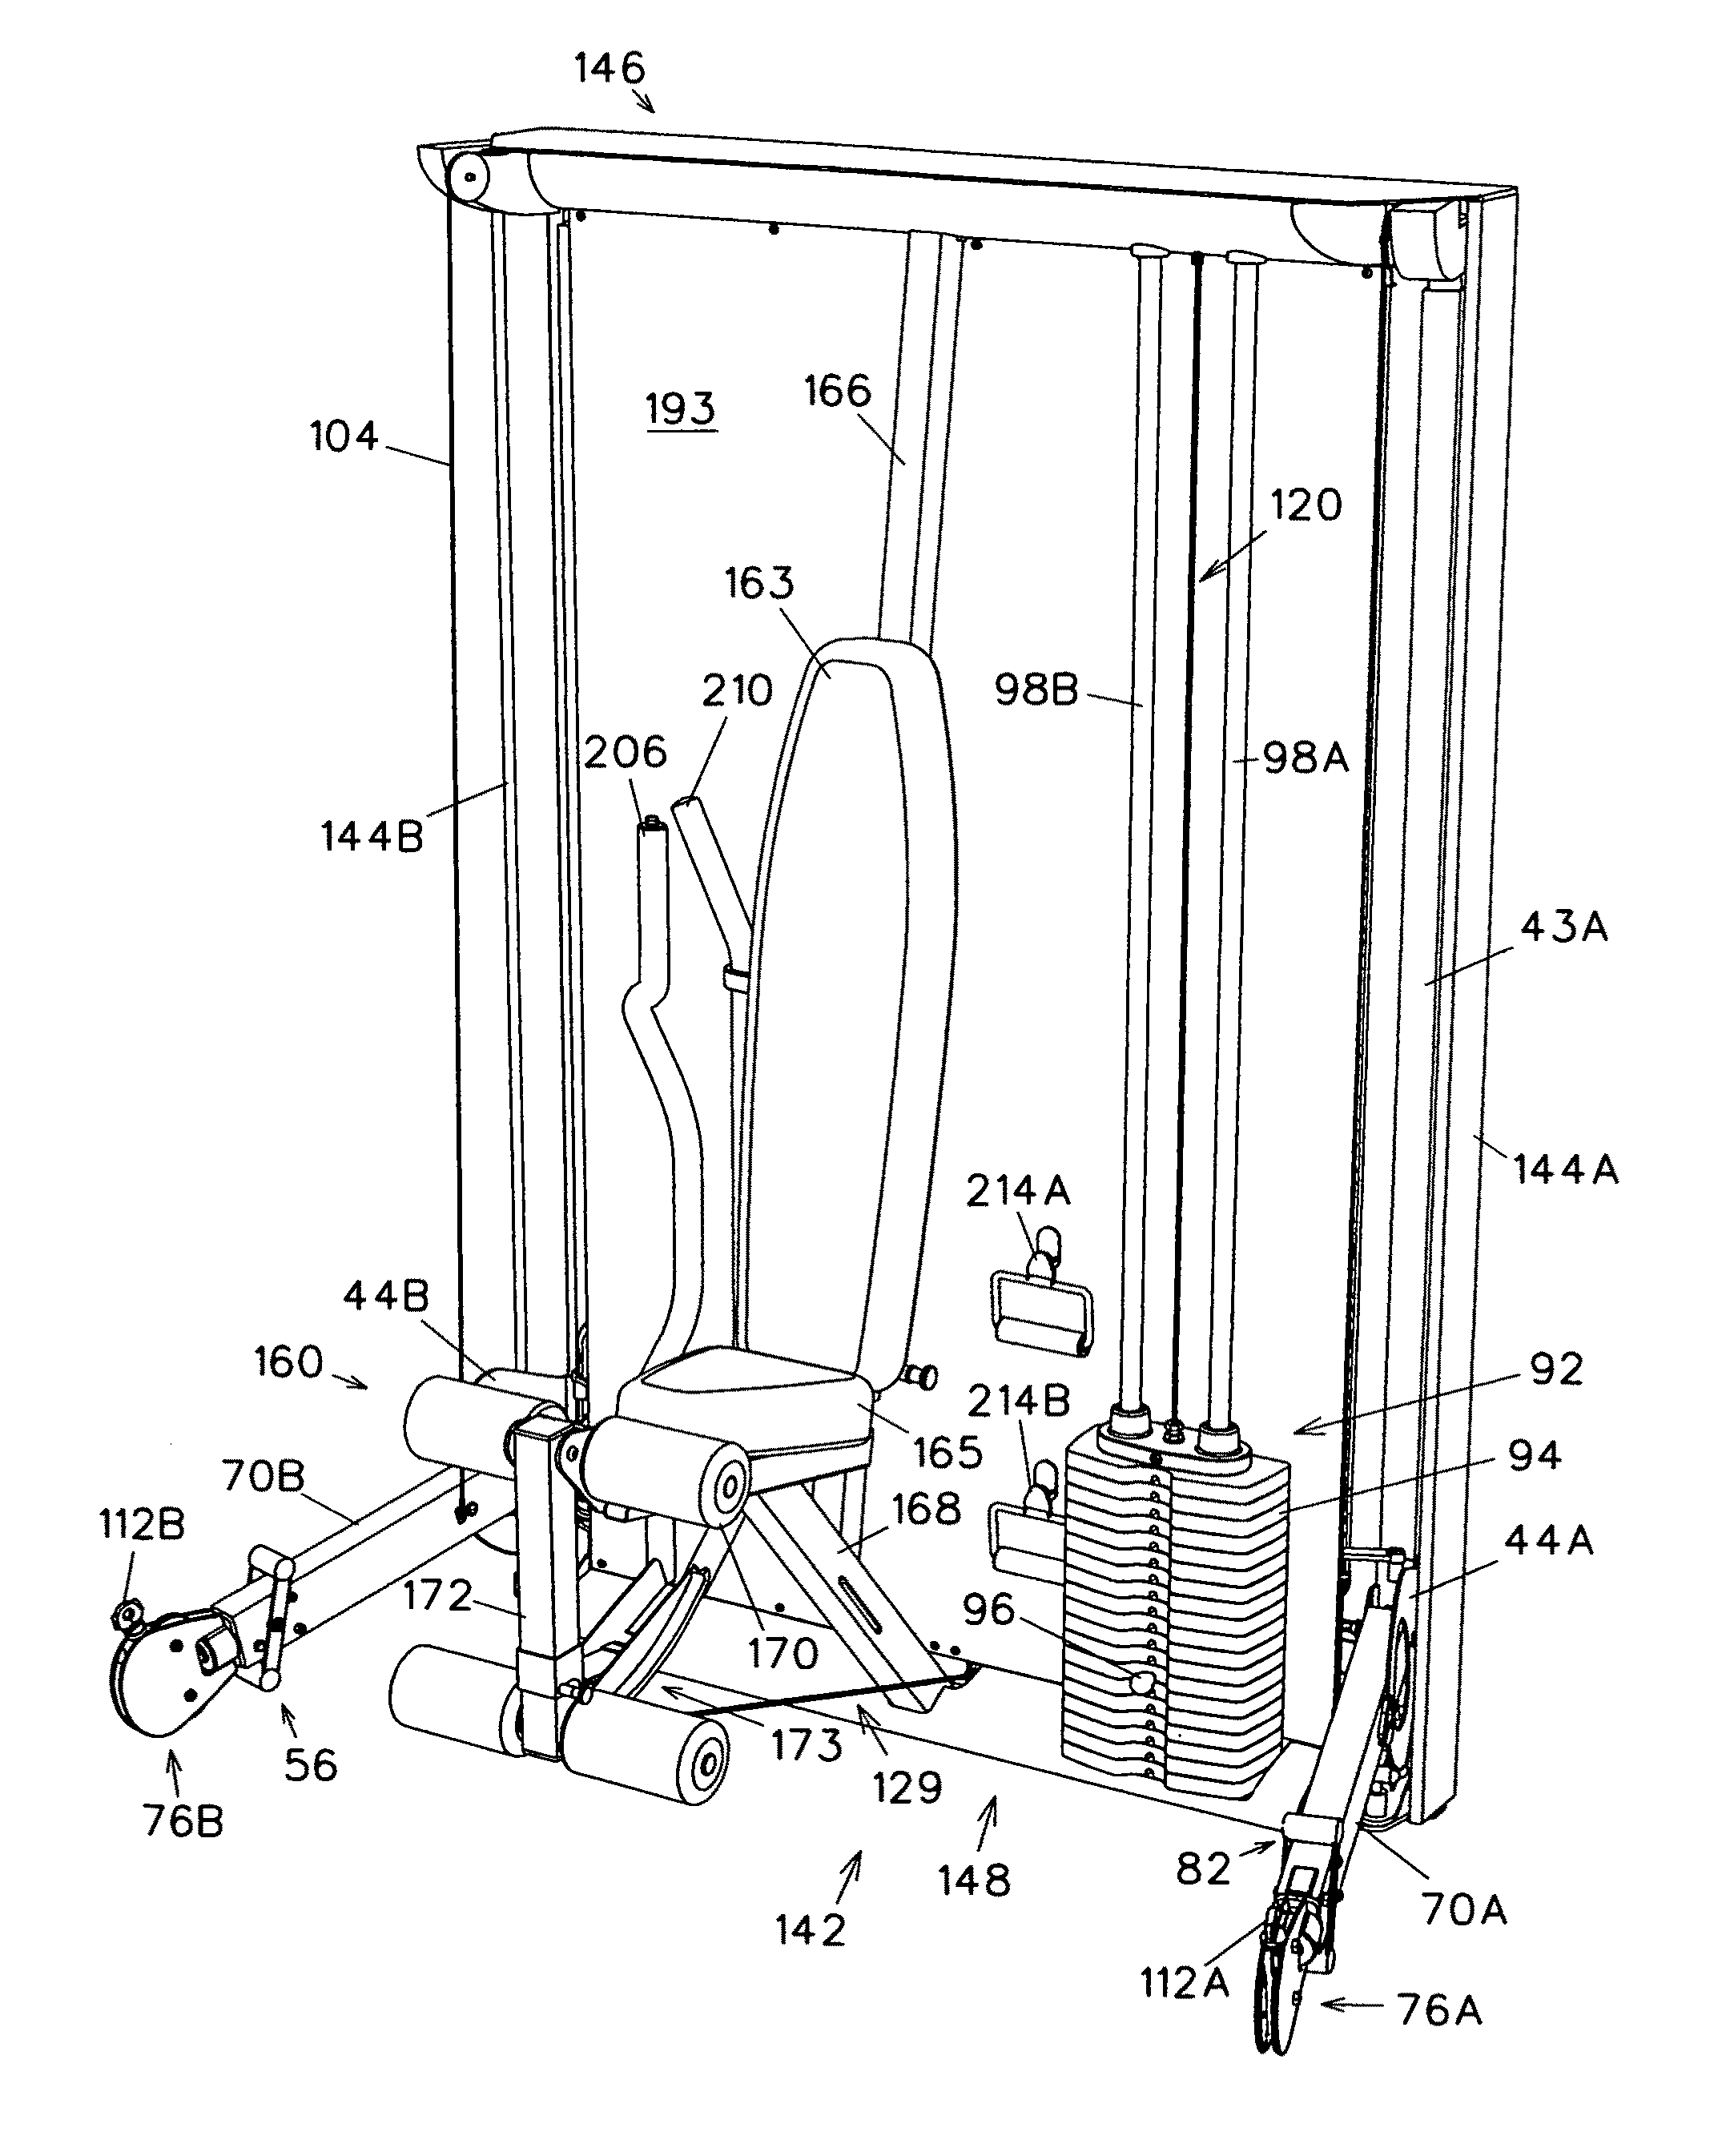 Compact multi-function exercise apparatus